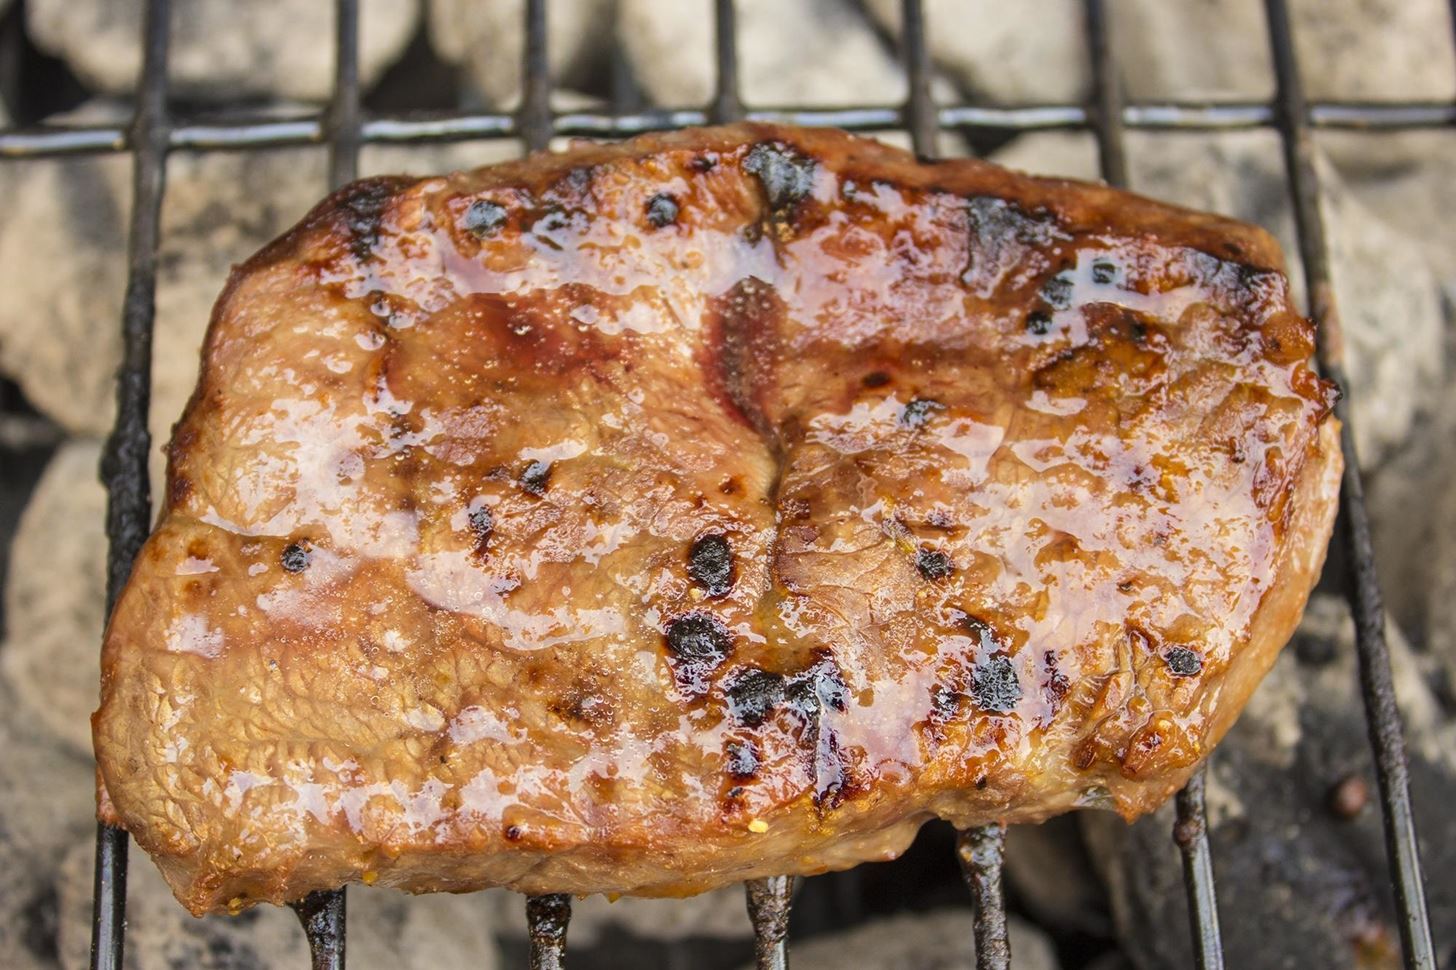 These Two Items Make the Only Meat Marinade You'll Ever Need